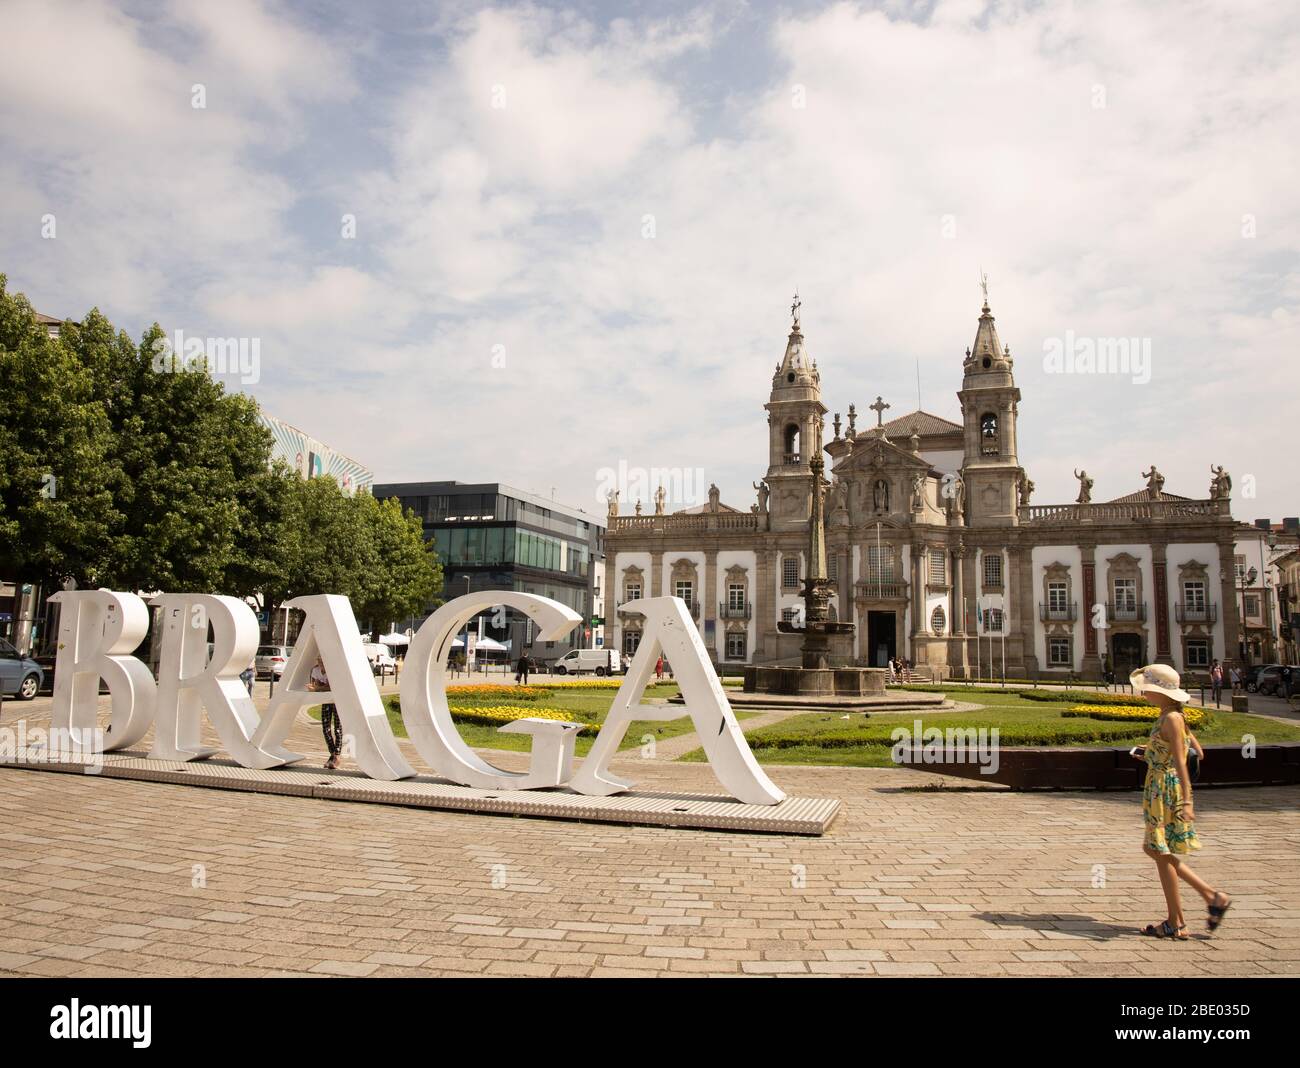 Large Braga sign with girl walking in foreground and hotel villa gale in background Braga, Portugal Stock Photo